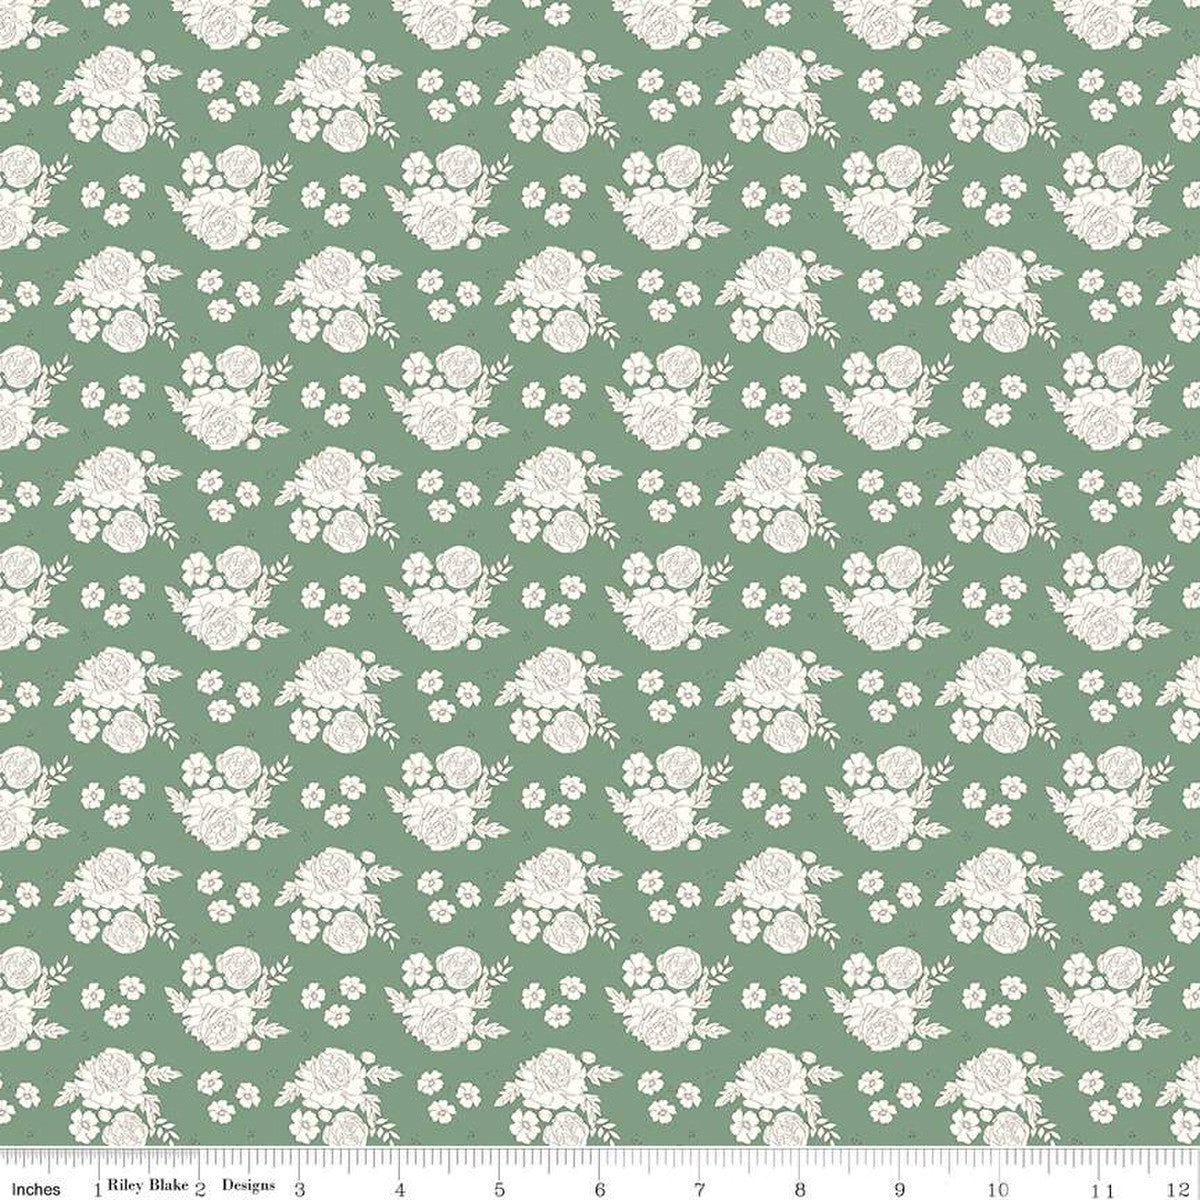 BloomBerry Petite Flowers Green